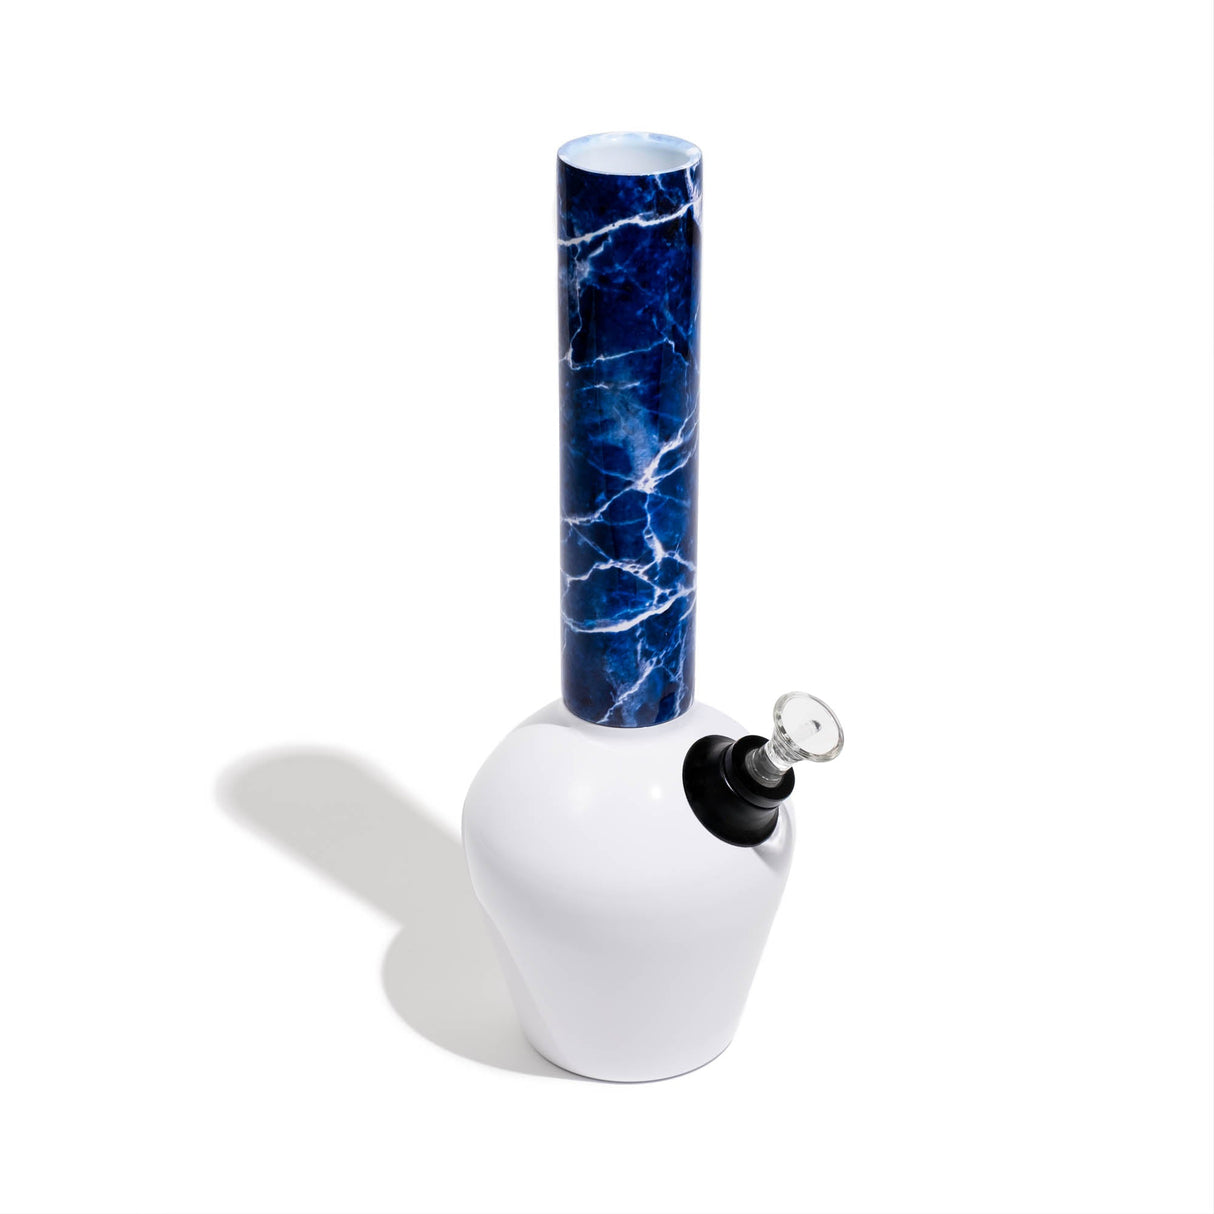 Chill Mix & Match Blue Marble Neckpiece for Bongs, White Background, Top Angle View